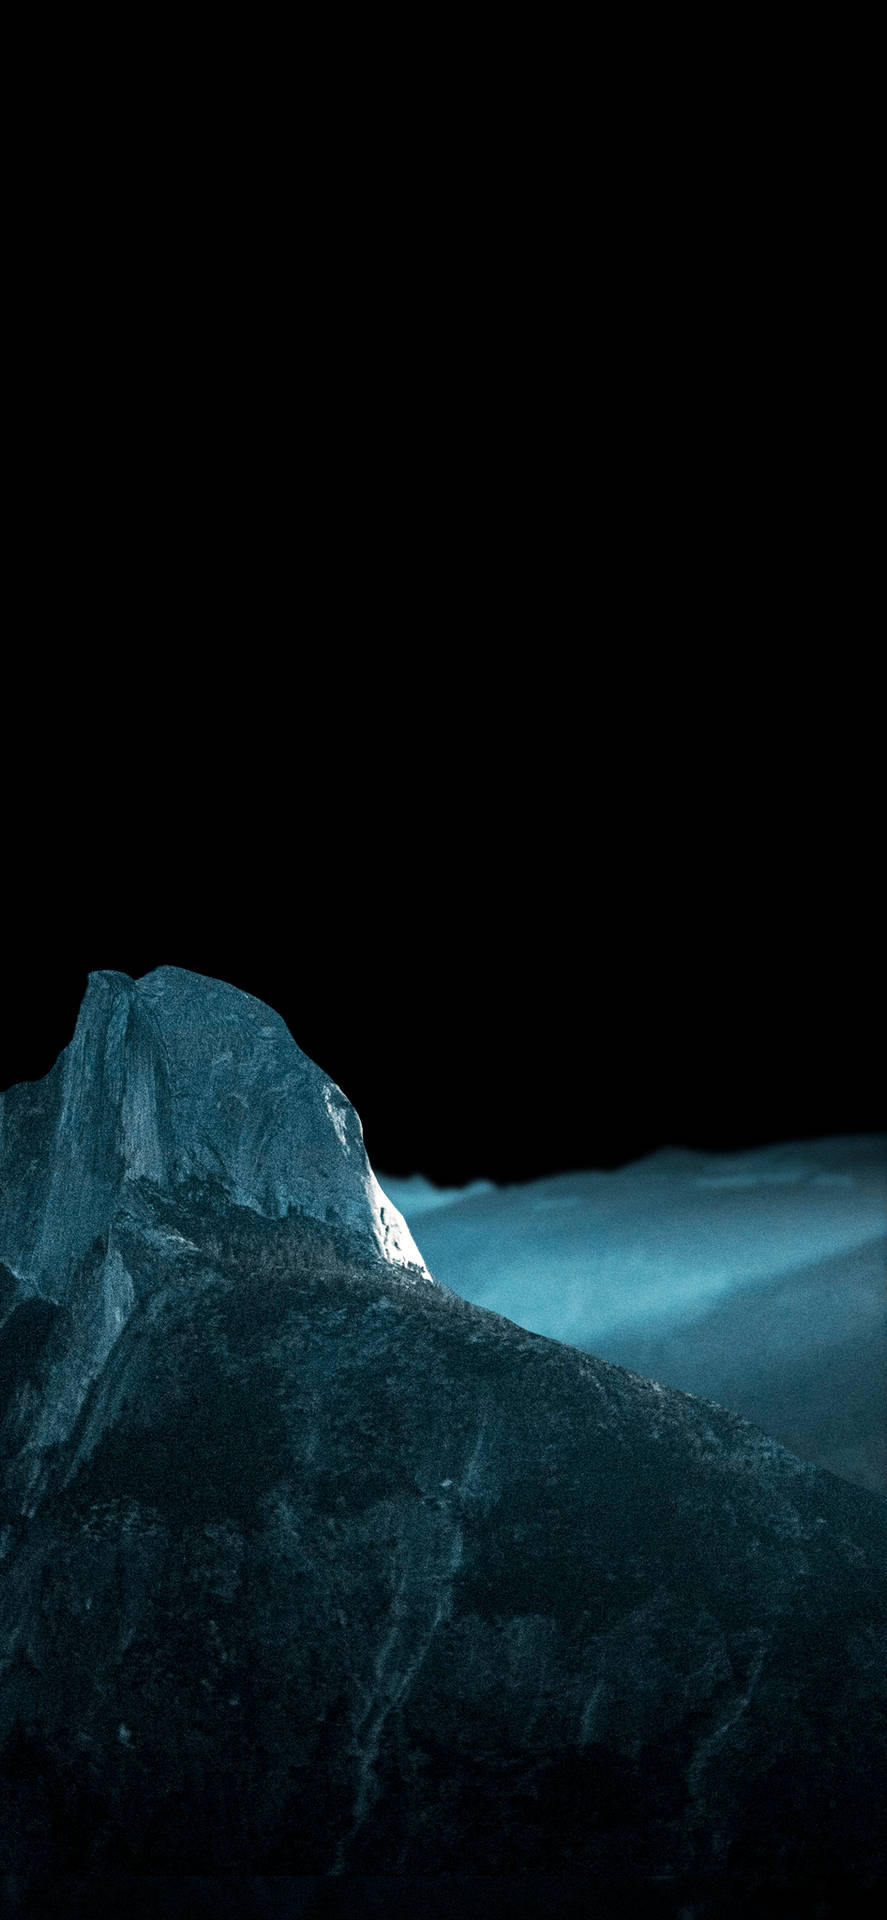 Iphone Xs Max Oled Blue Mountains Background